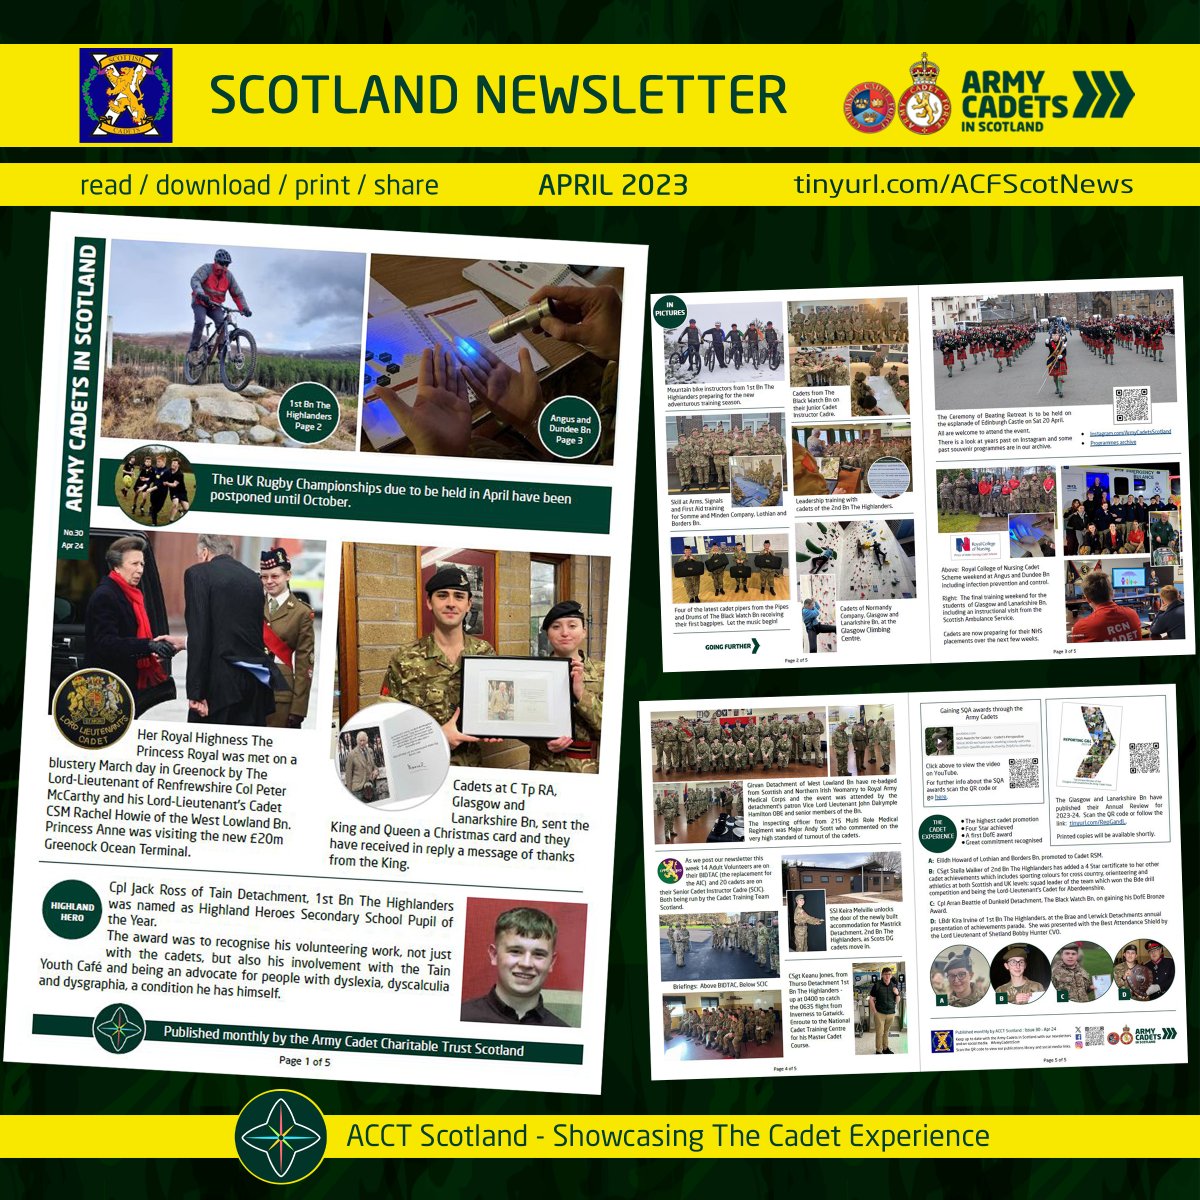 The latest Army Cadets in Scotland newsletter is here: tinyurl.com/ACFScotNews Published by ACCT Scotland #ArmyCadetsScot